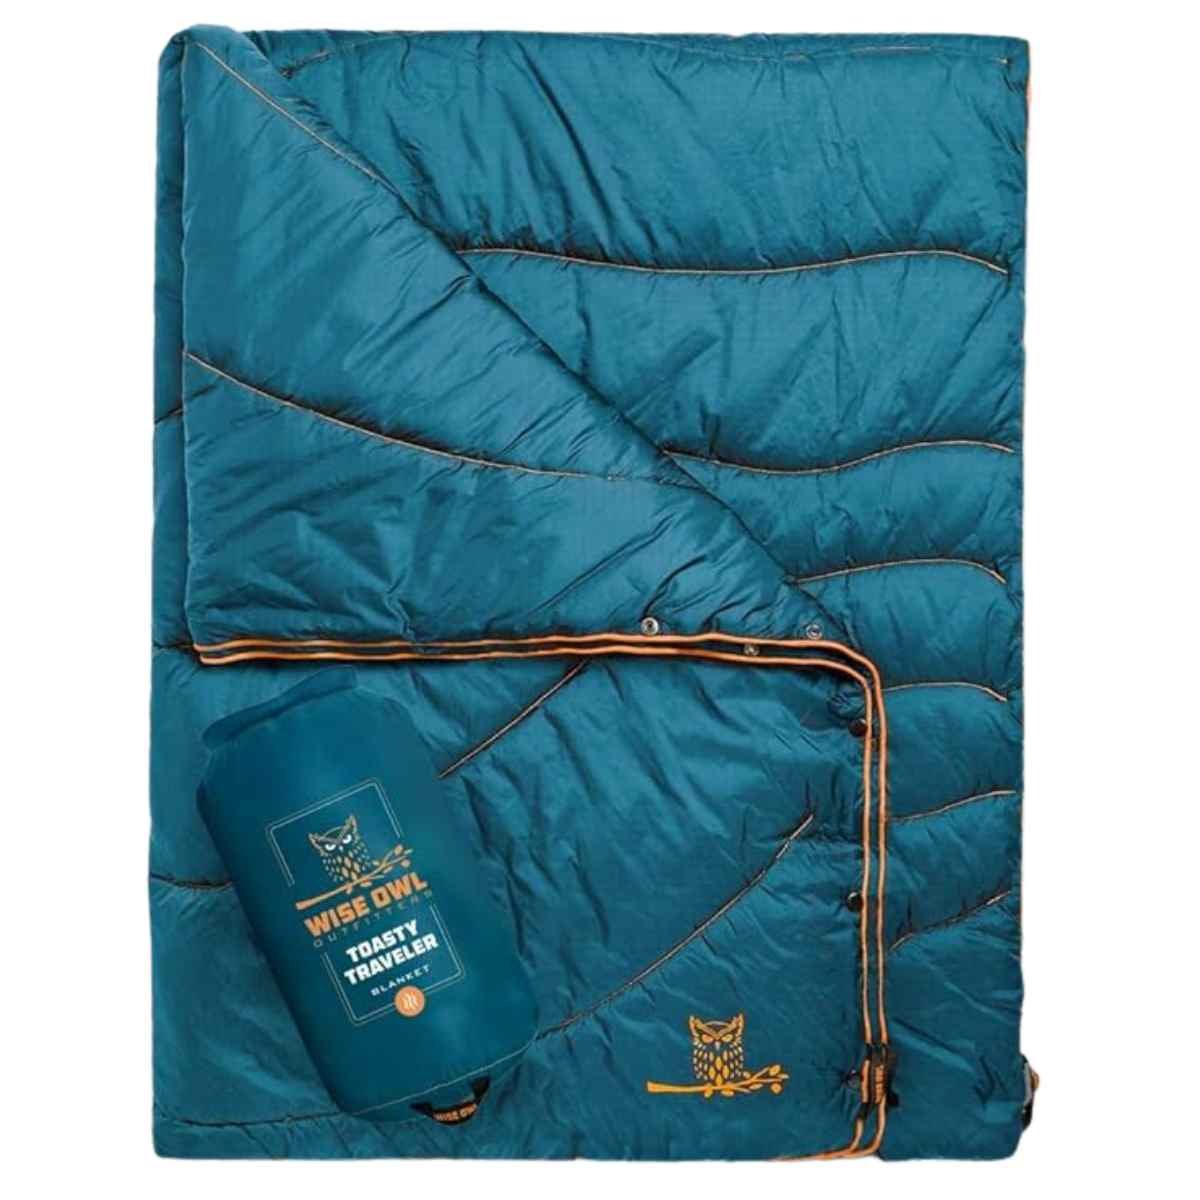 Backcountry Insulated Blanket, 75 x 52